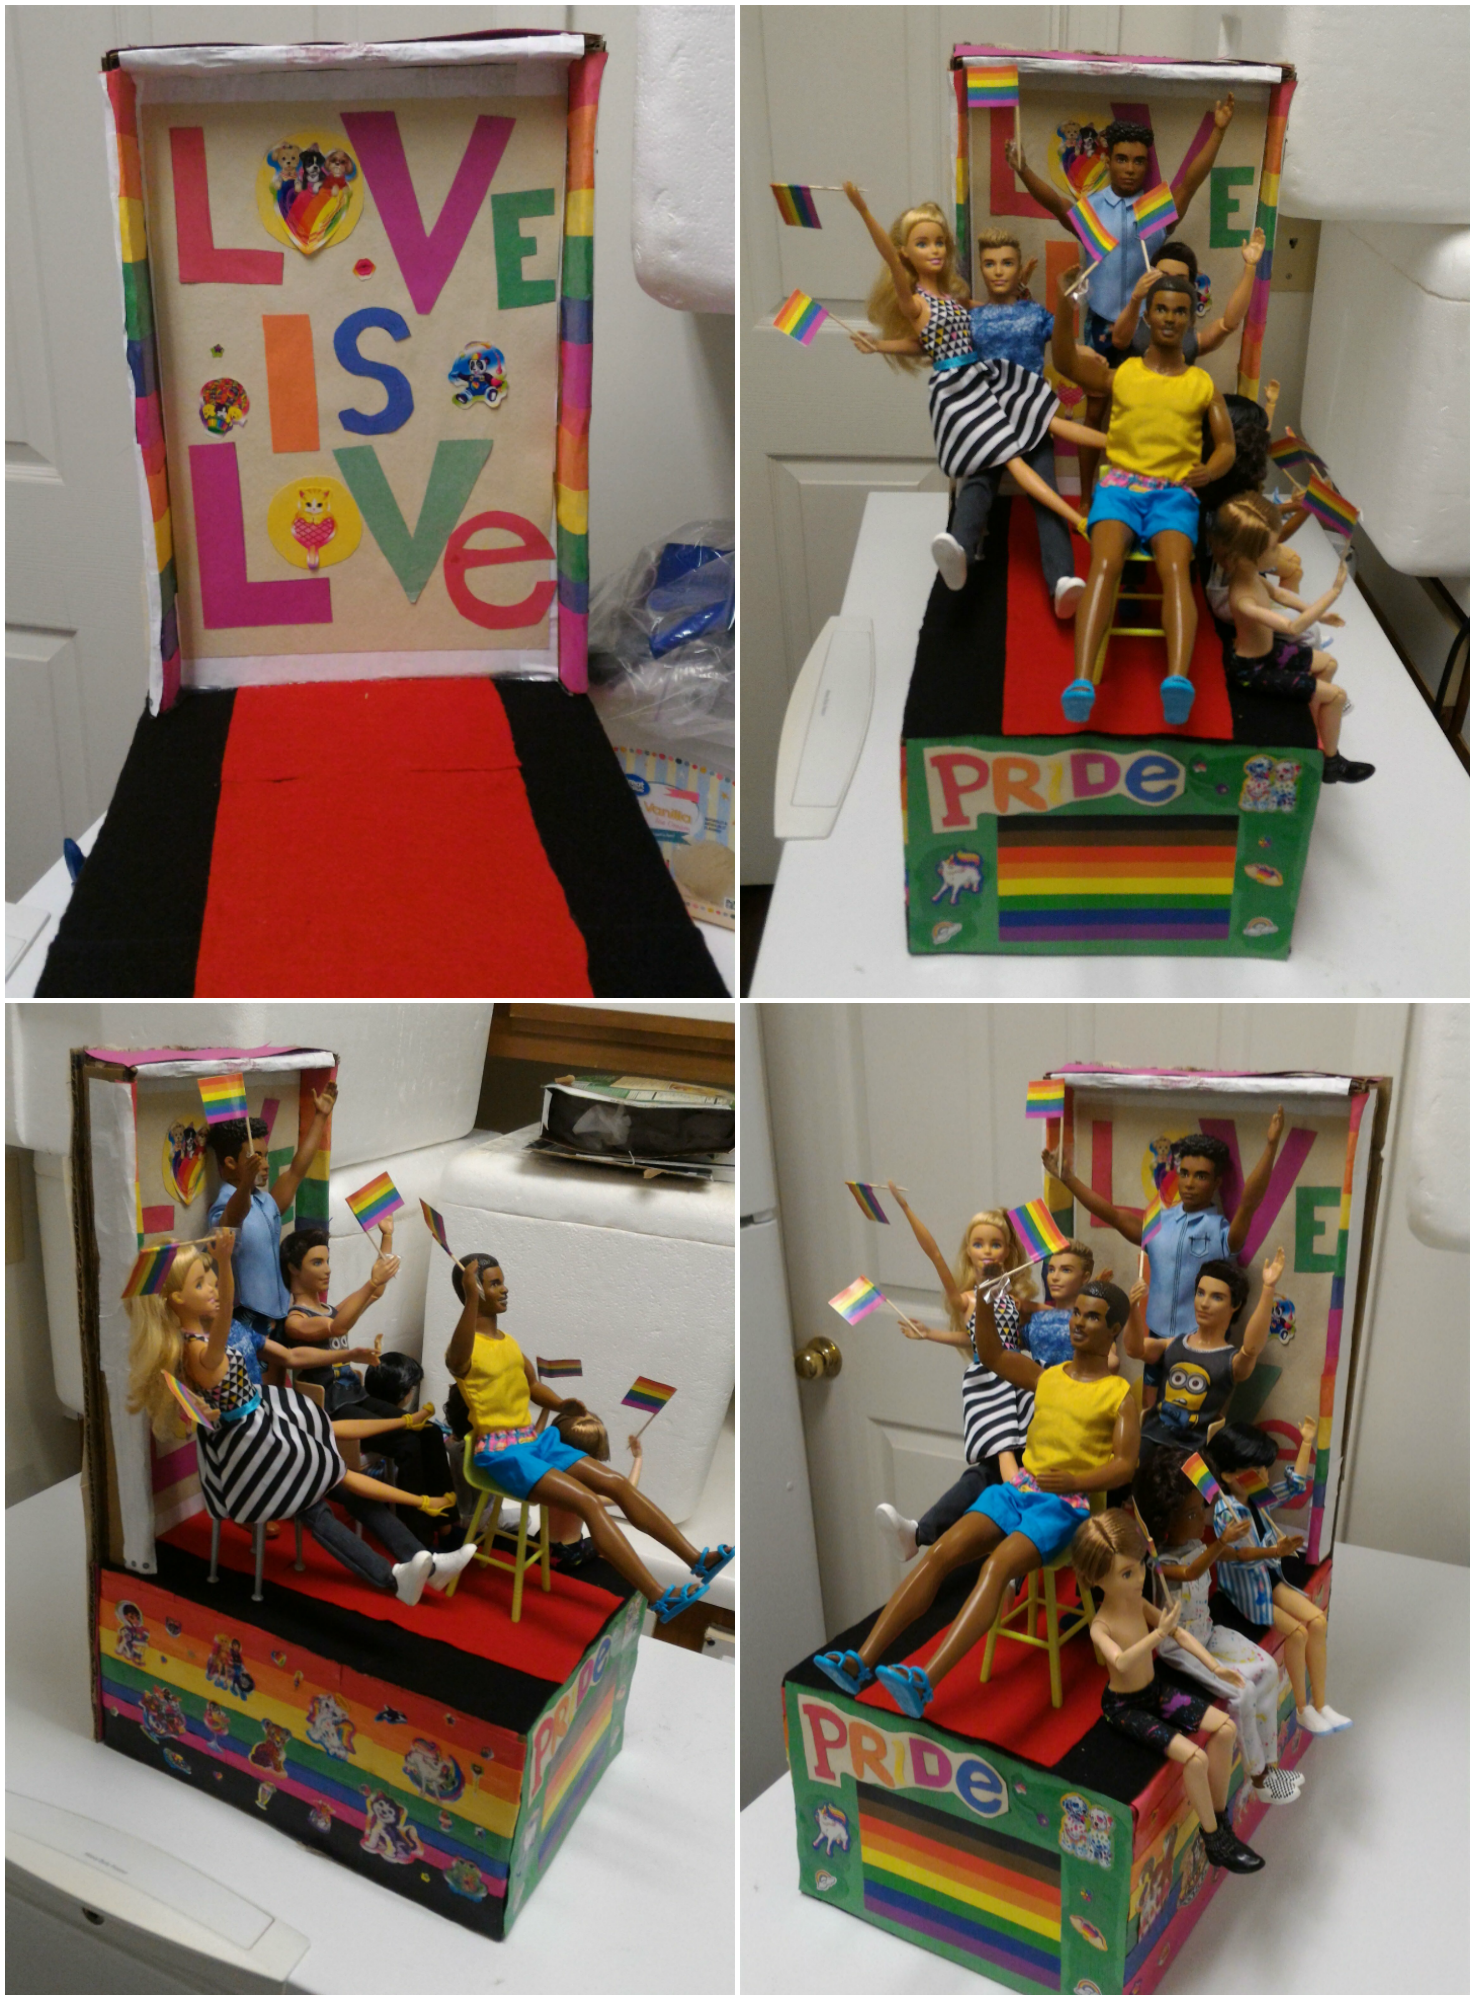 Love is Love float made out of a shoebox, covered in rainbows, stickers, and Barbie and Ken dolls